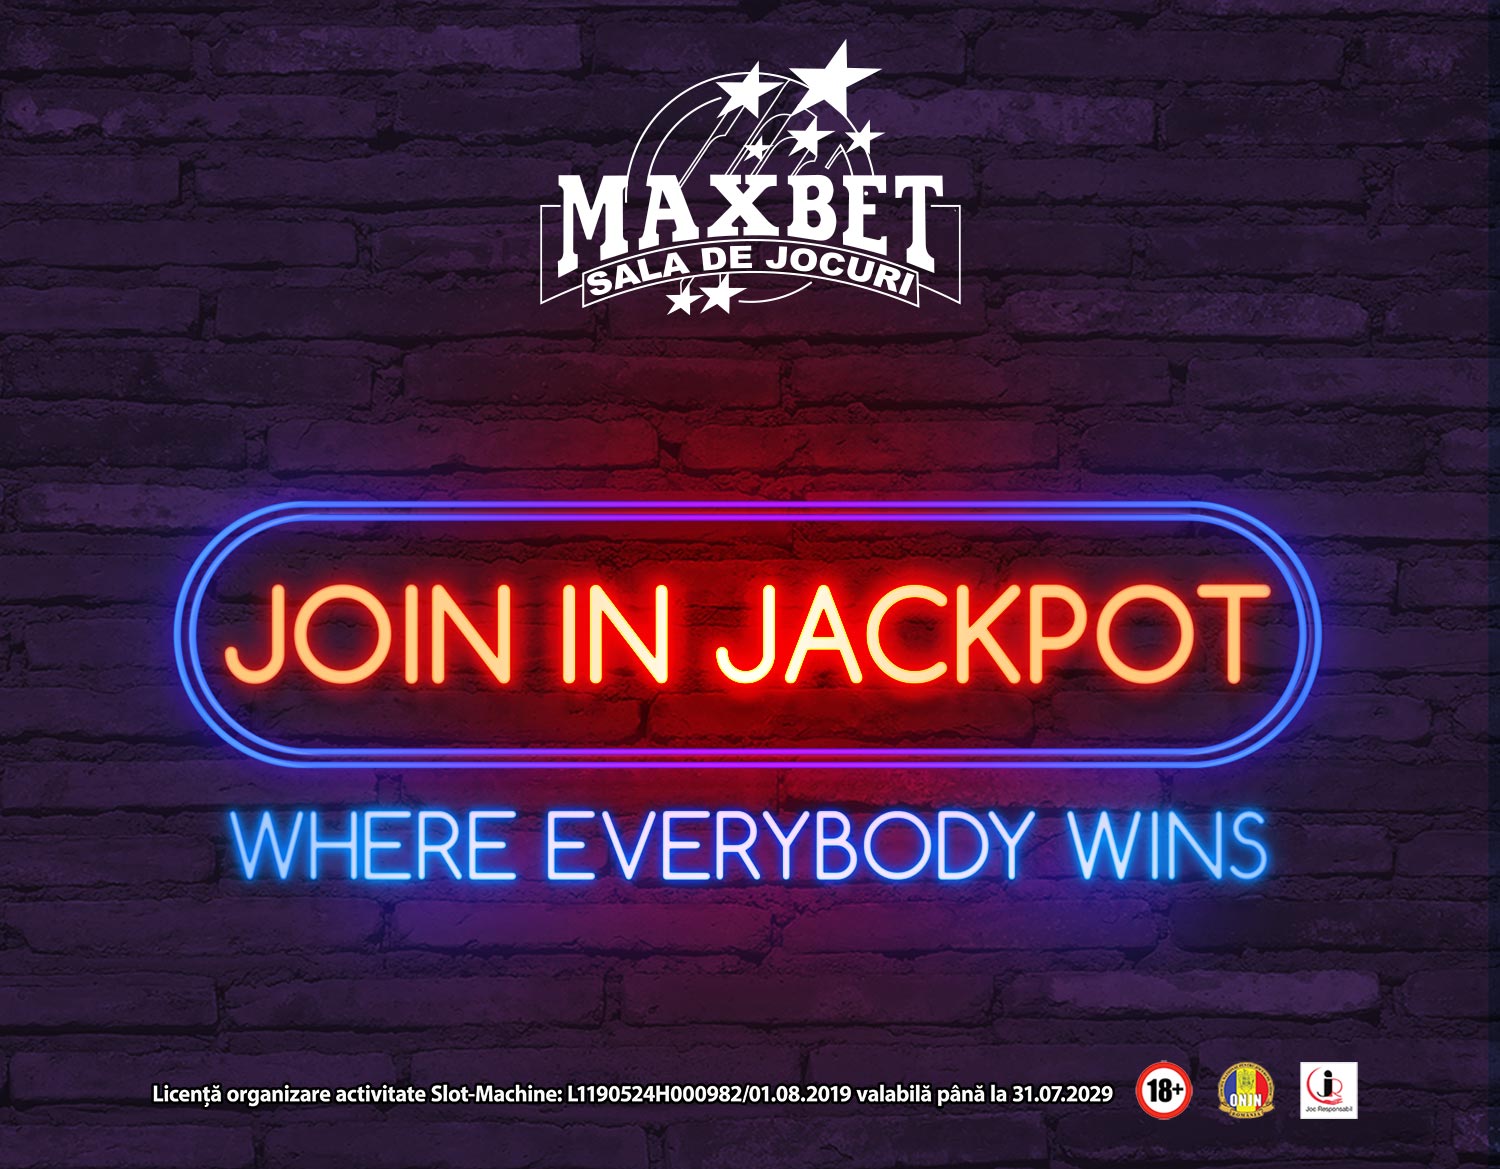 “Join In Jackpot”